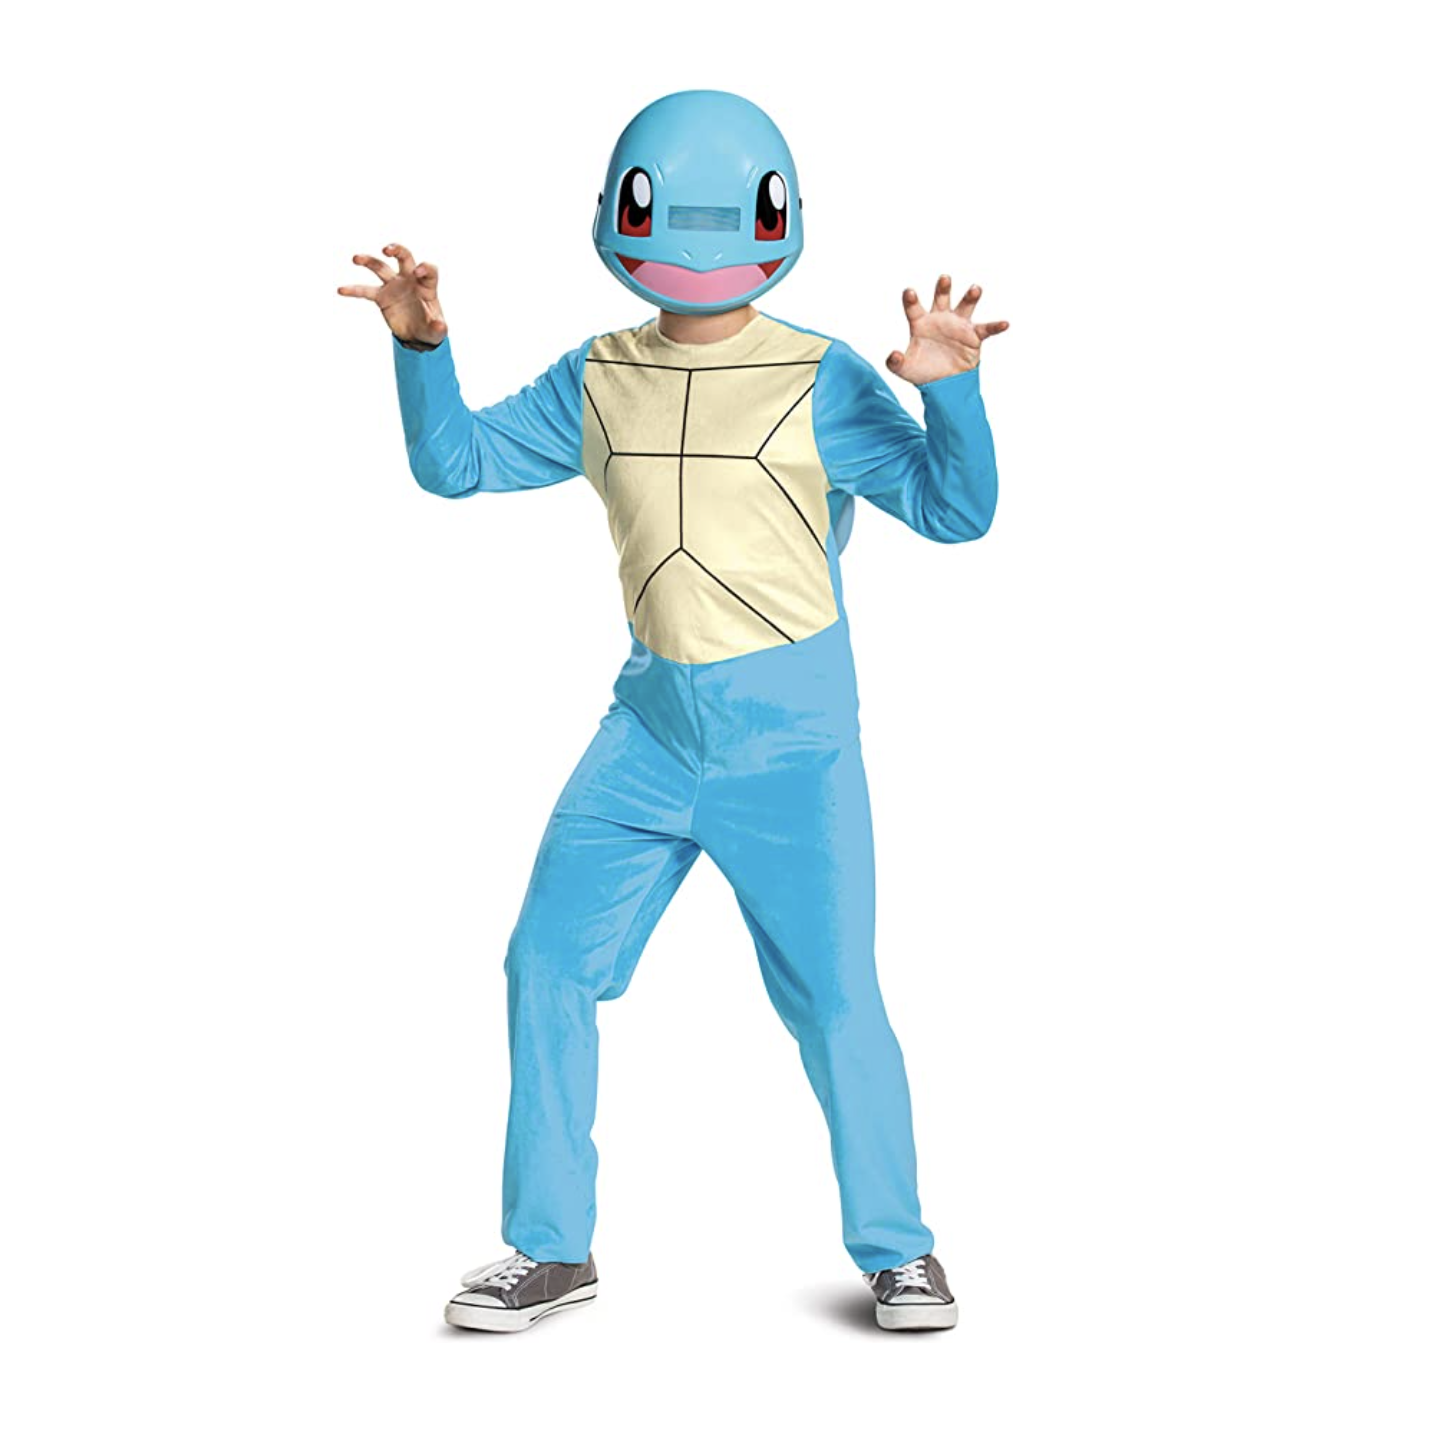 18 Best Pokemon Costume Ideas for Halloween 2021 - Pikachu, Ash Ketchum and More